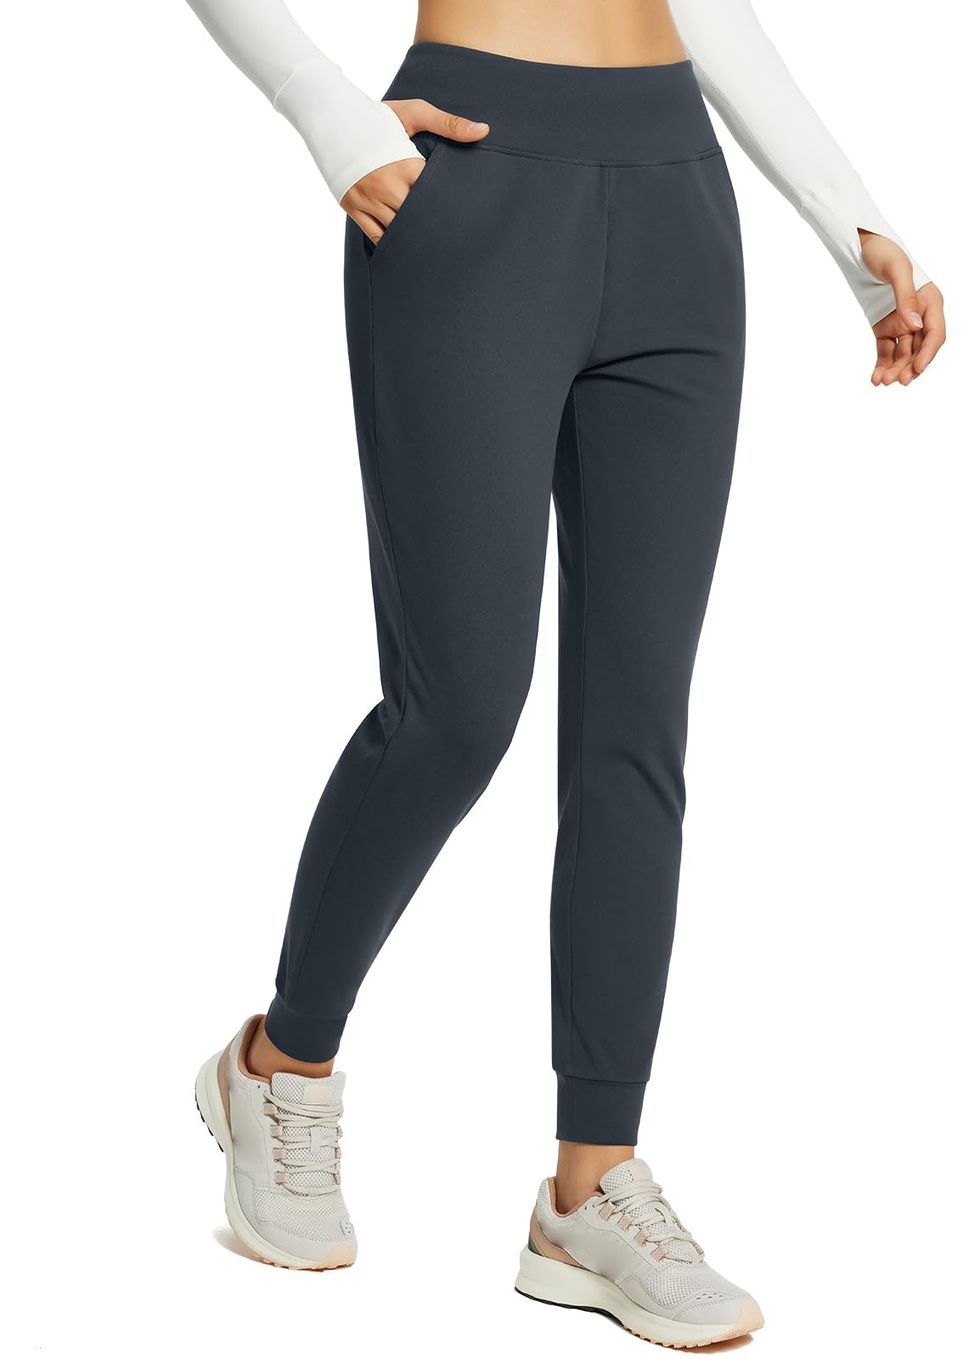 STRETCH WARM LINED JOGGER PANTS